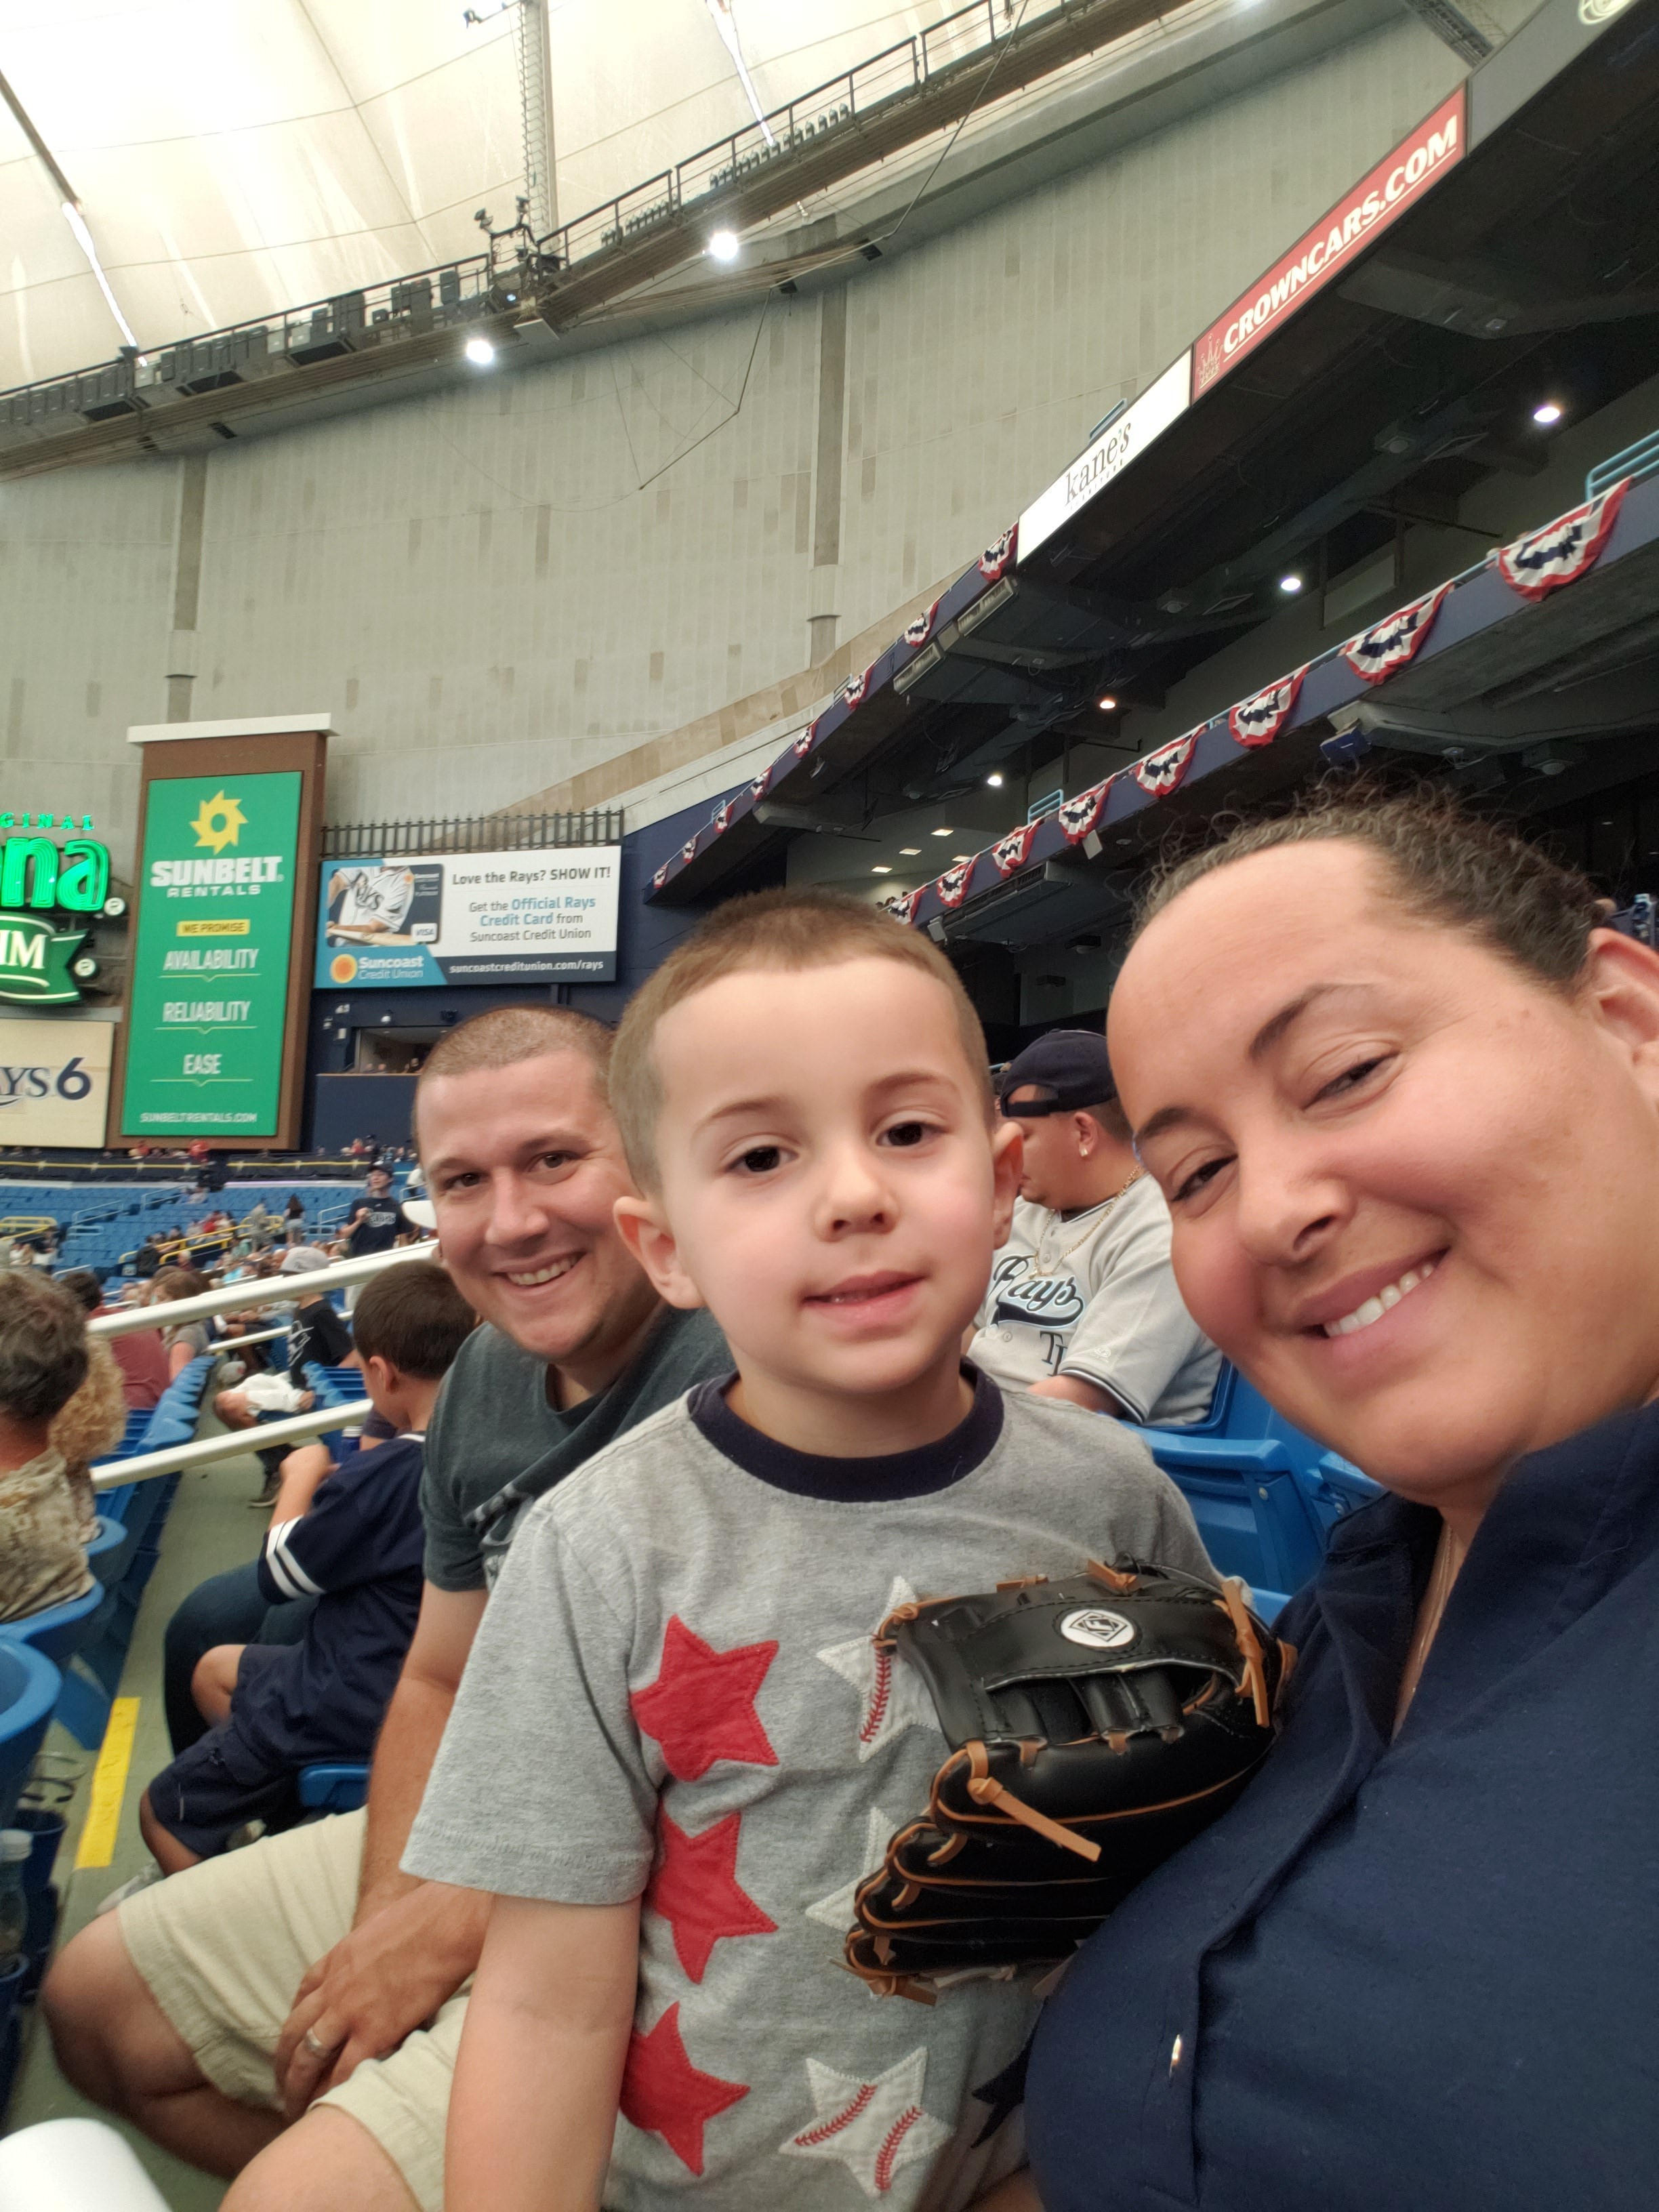 Tampa Bay Rays fan credits her love of baseball for helping her